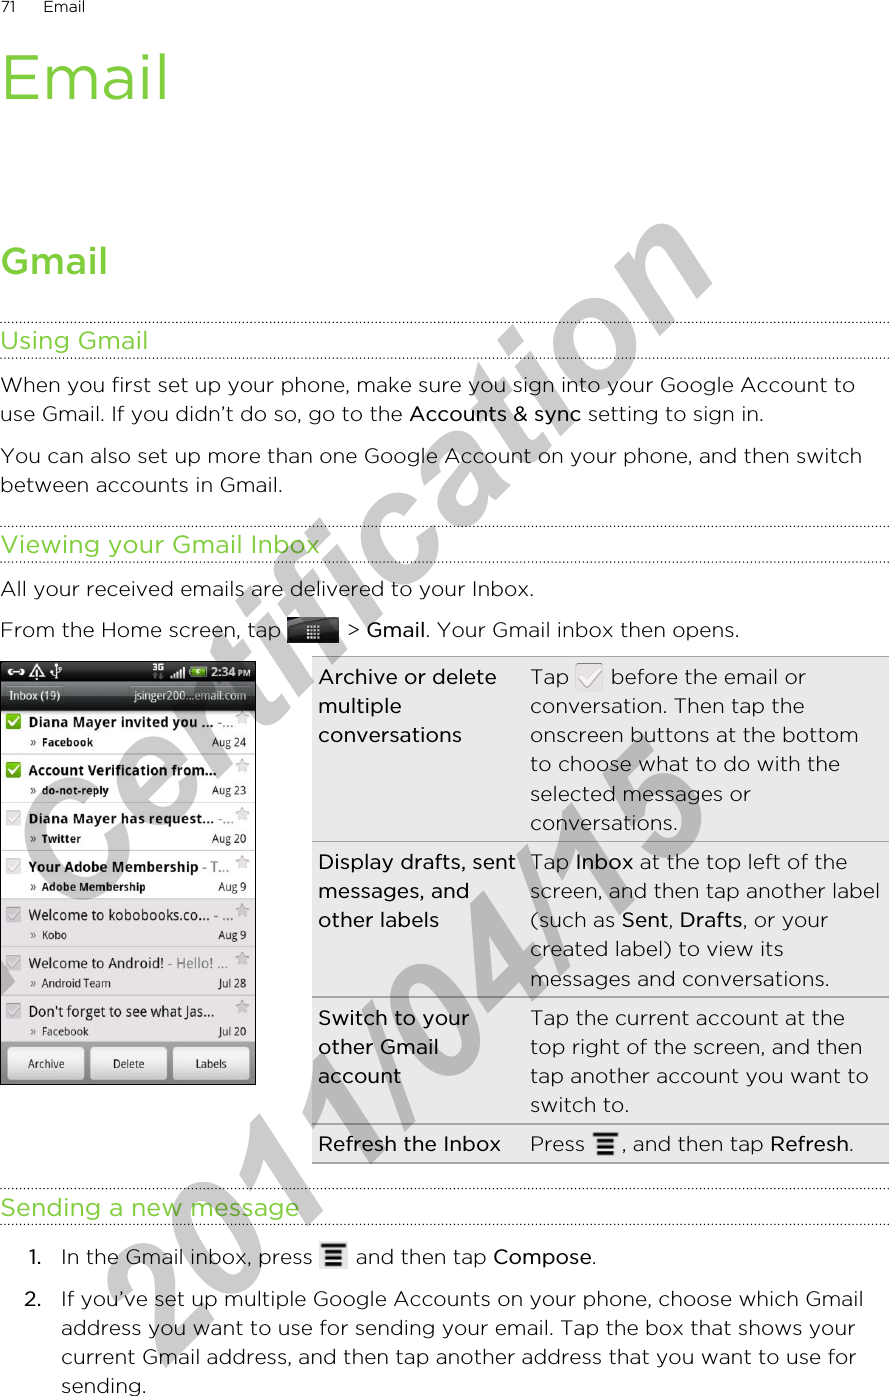 EmailGmailUsing GmailWhen you first set up your phone, make sure you sign into your Google Account touse Gmail. If you didn’t do so, go to the Accounts &amp; sync setting to sign in.You can also set up more than one Google Account on your phone, and then switchbetween accounts in Gmail.Viewing your Gmail InboxAll your received emails are delivered to your Inbox.From the Home screen, tap   &gt; Gmail. Your Gmail inbox then opens.Archive or deletemultipleconversationsTap   before the email orconversation. Then tap theonscreen buttons at the bottomto choose what to do with theselected messages orconversations.Display drafts, sentmessages, andother labelsTap Inbox at the top left of thescreen, and then tap another label(such as Sent, Drafts, or yourcreated label) to view itsmessages and conversations.Switch to yourother GmailaccountTap the current account at thetop right of the screen, and thentap another account you want toswitch to.Refresh the Inbox Press  , and then tap Refresh.Sending a new message1. In the Gmail inbox, press   and then tap Compose.2. If you’ve set up multiple Google Accounts on your phone, choose which Gmailaddress you want to use for sending your email. Tap the box that shows yourcurrent Gmail address, and then tap another address that you want to use forsending.71 Emailfor Certification  2011/04/15